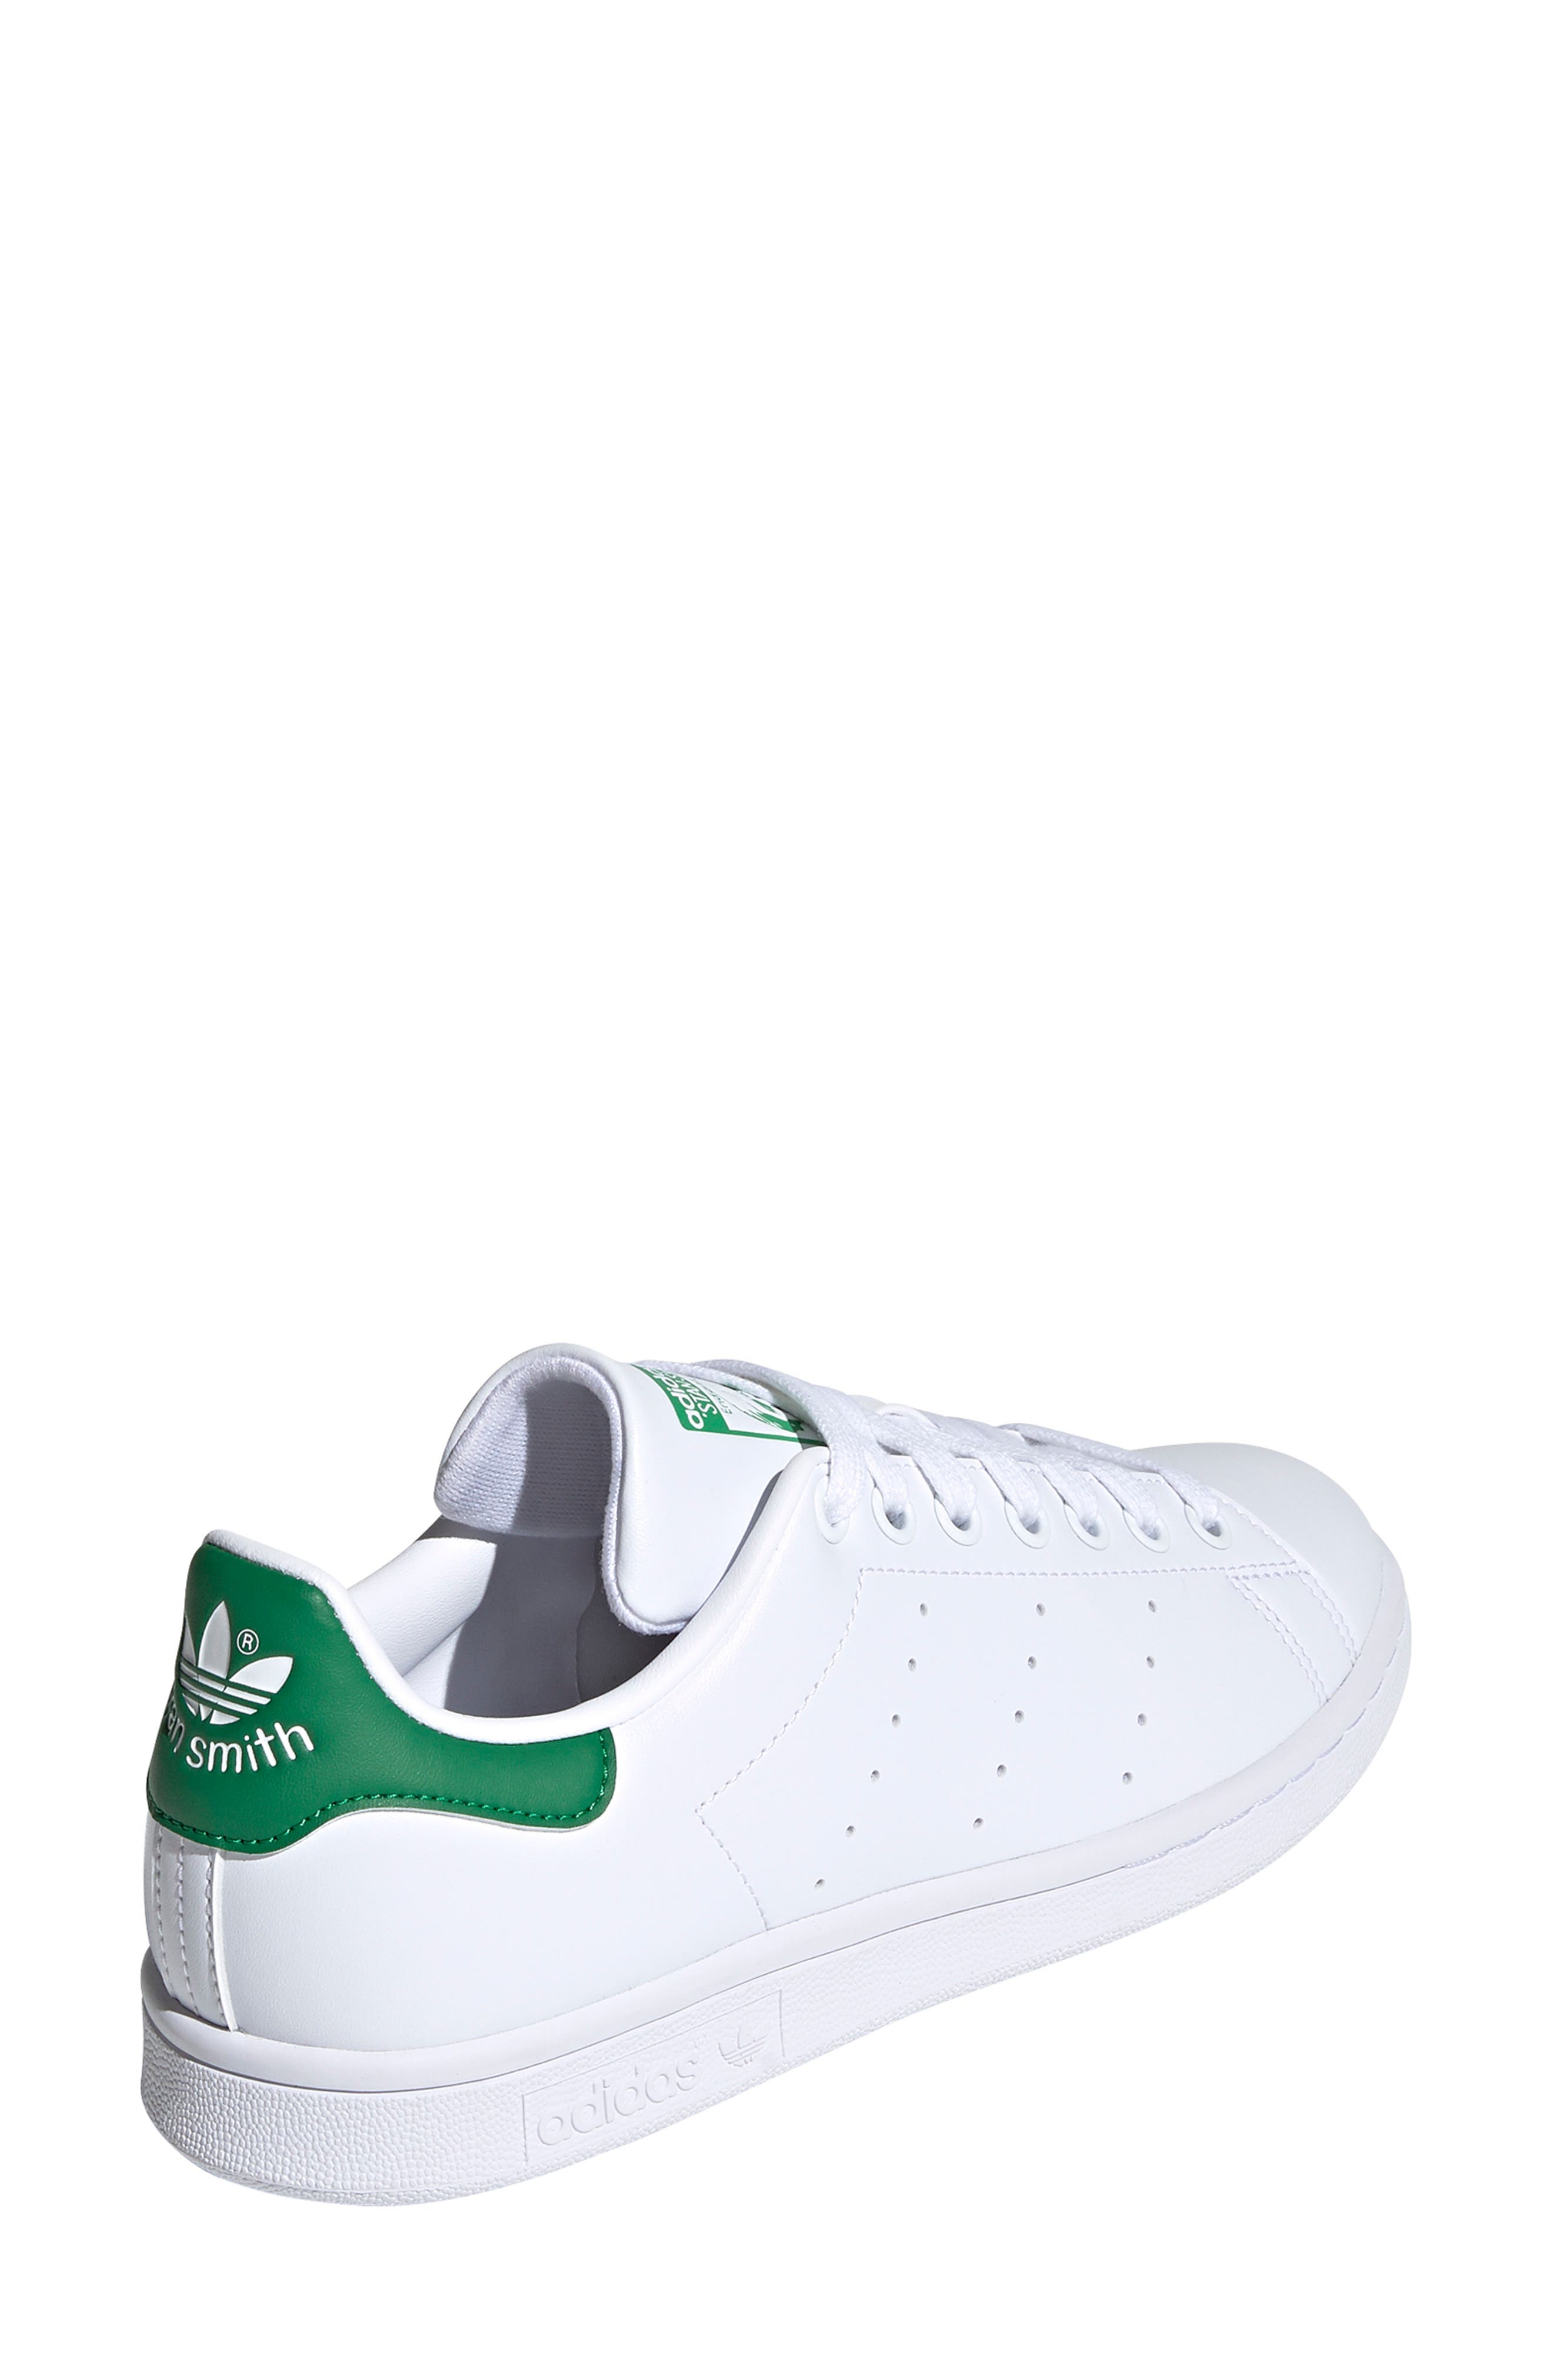 h and m stan smith